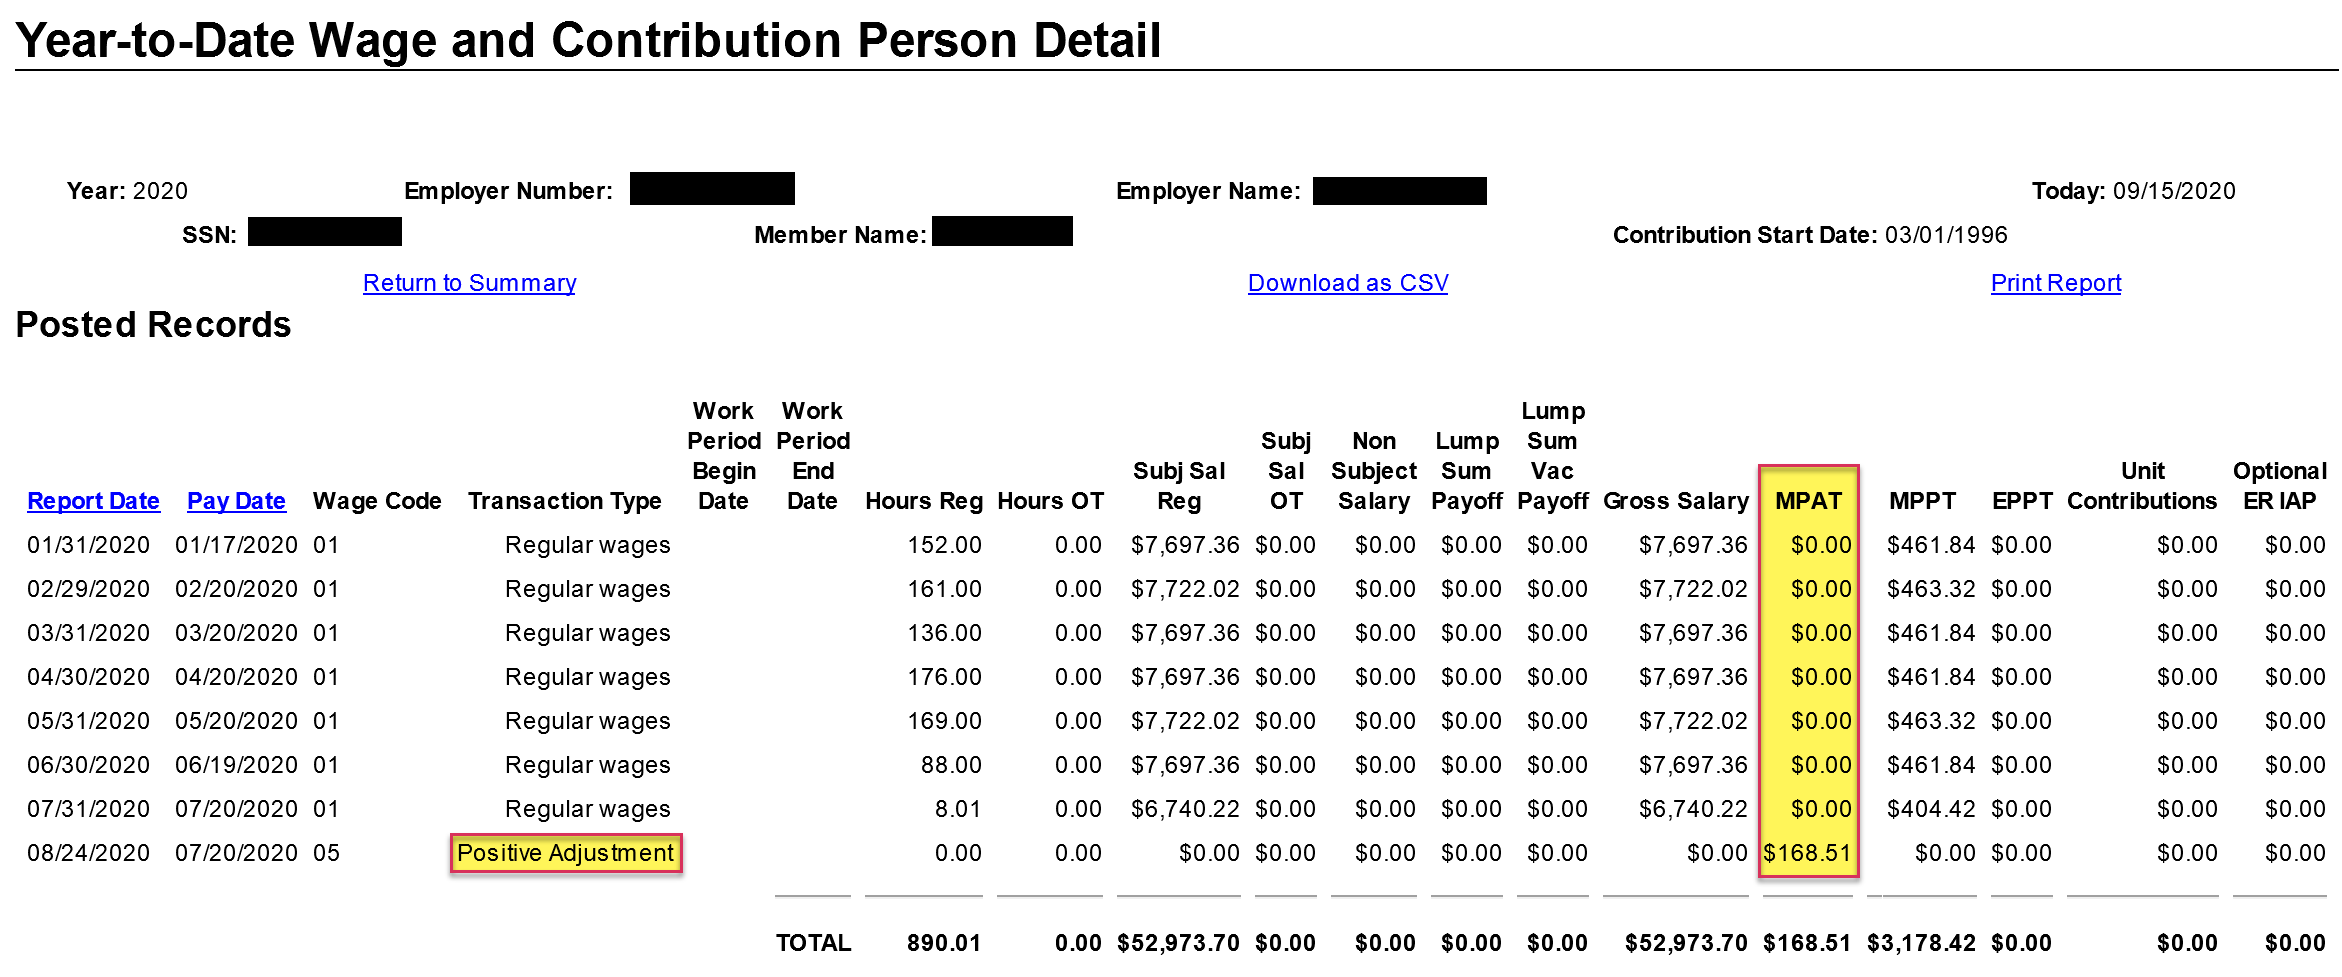 YTD Wage and Contribution Person Detail.png